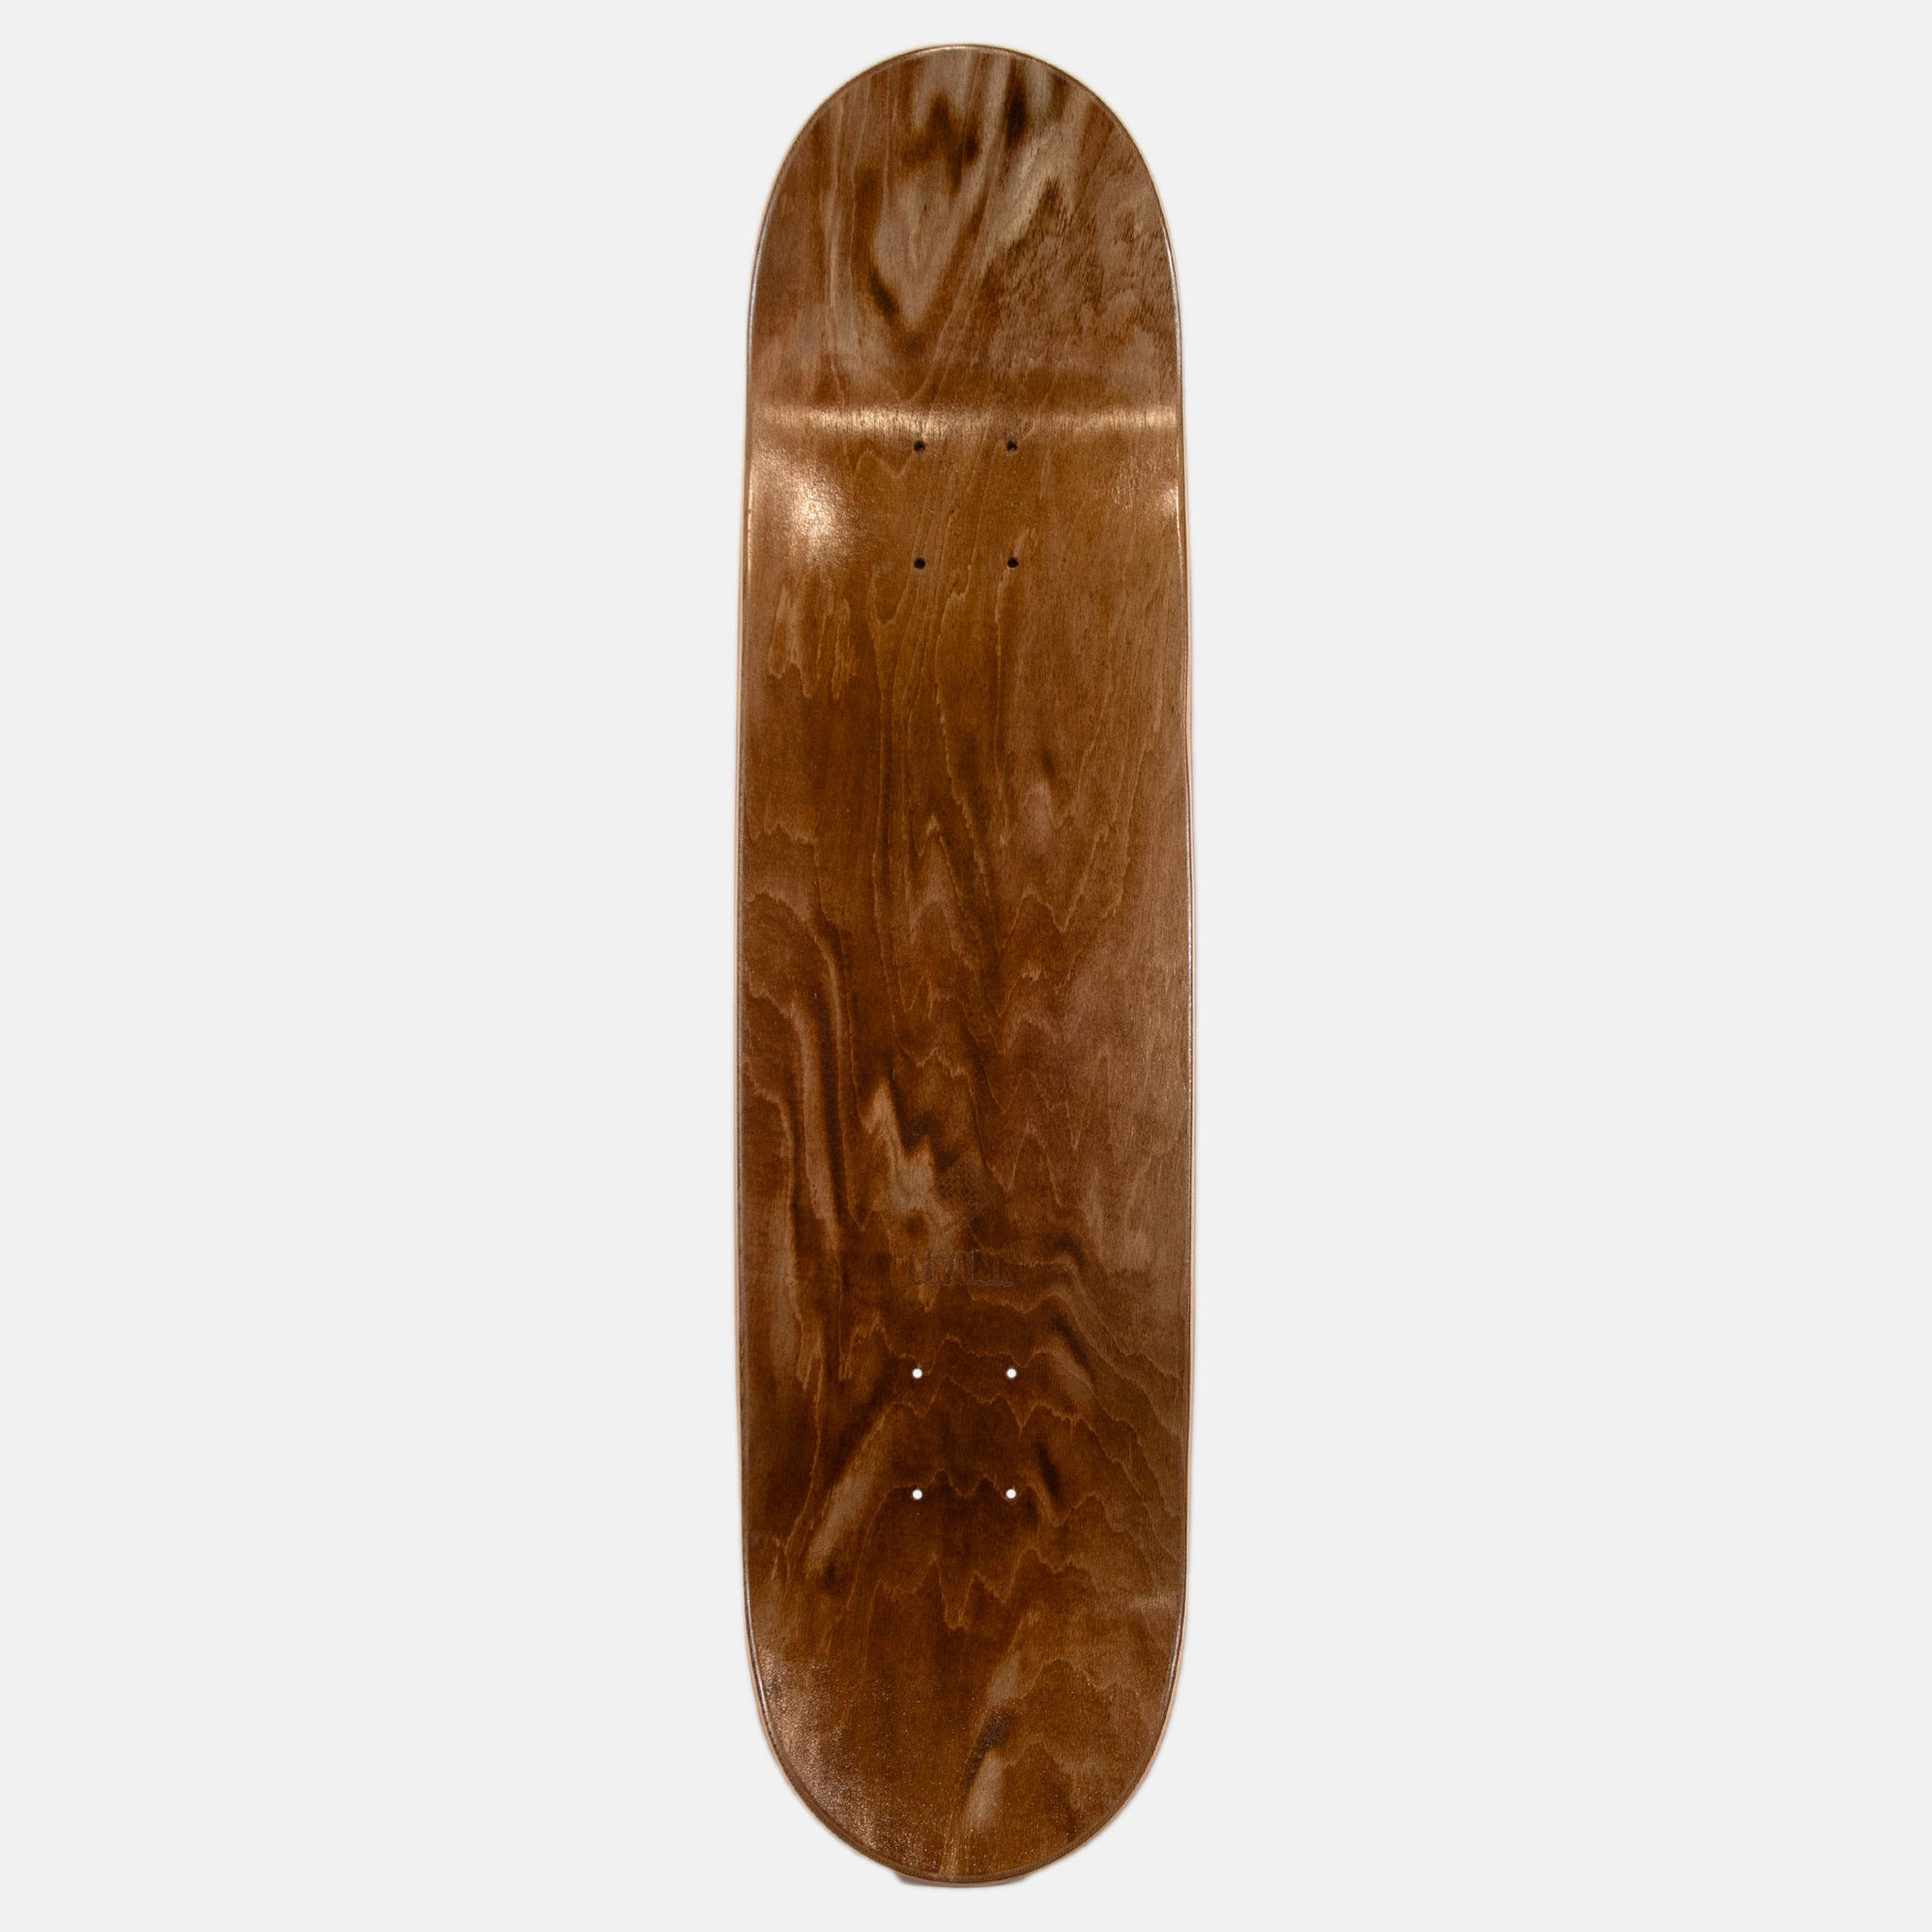 The National Skateboard Co. - 8.0" Tommy May Debut Skateboard Deck - (High Concave)